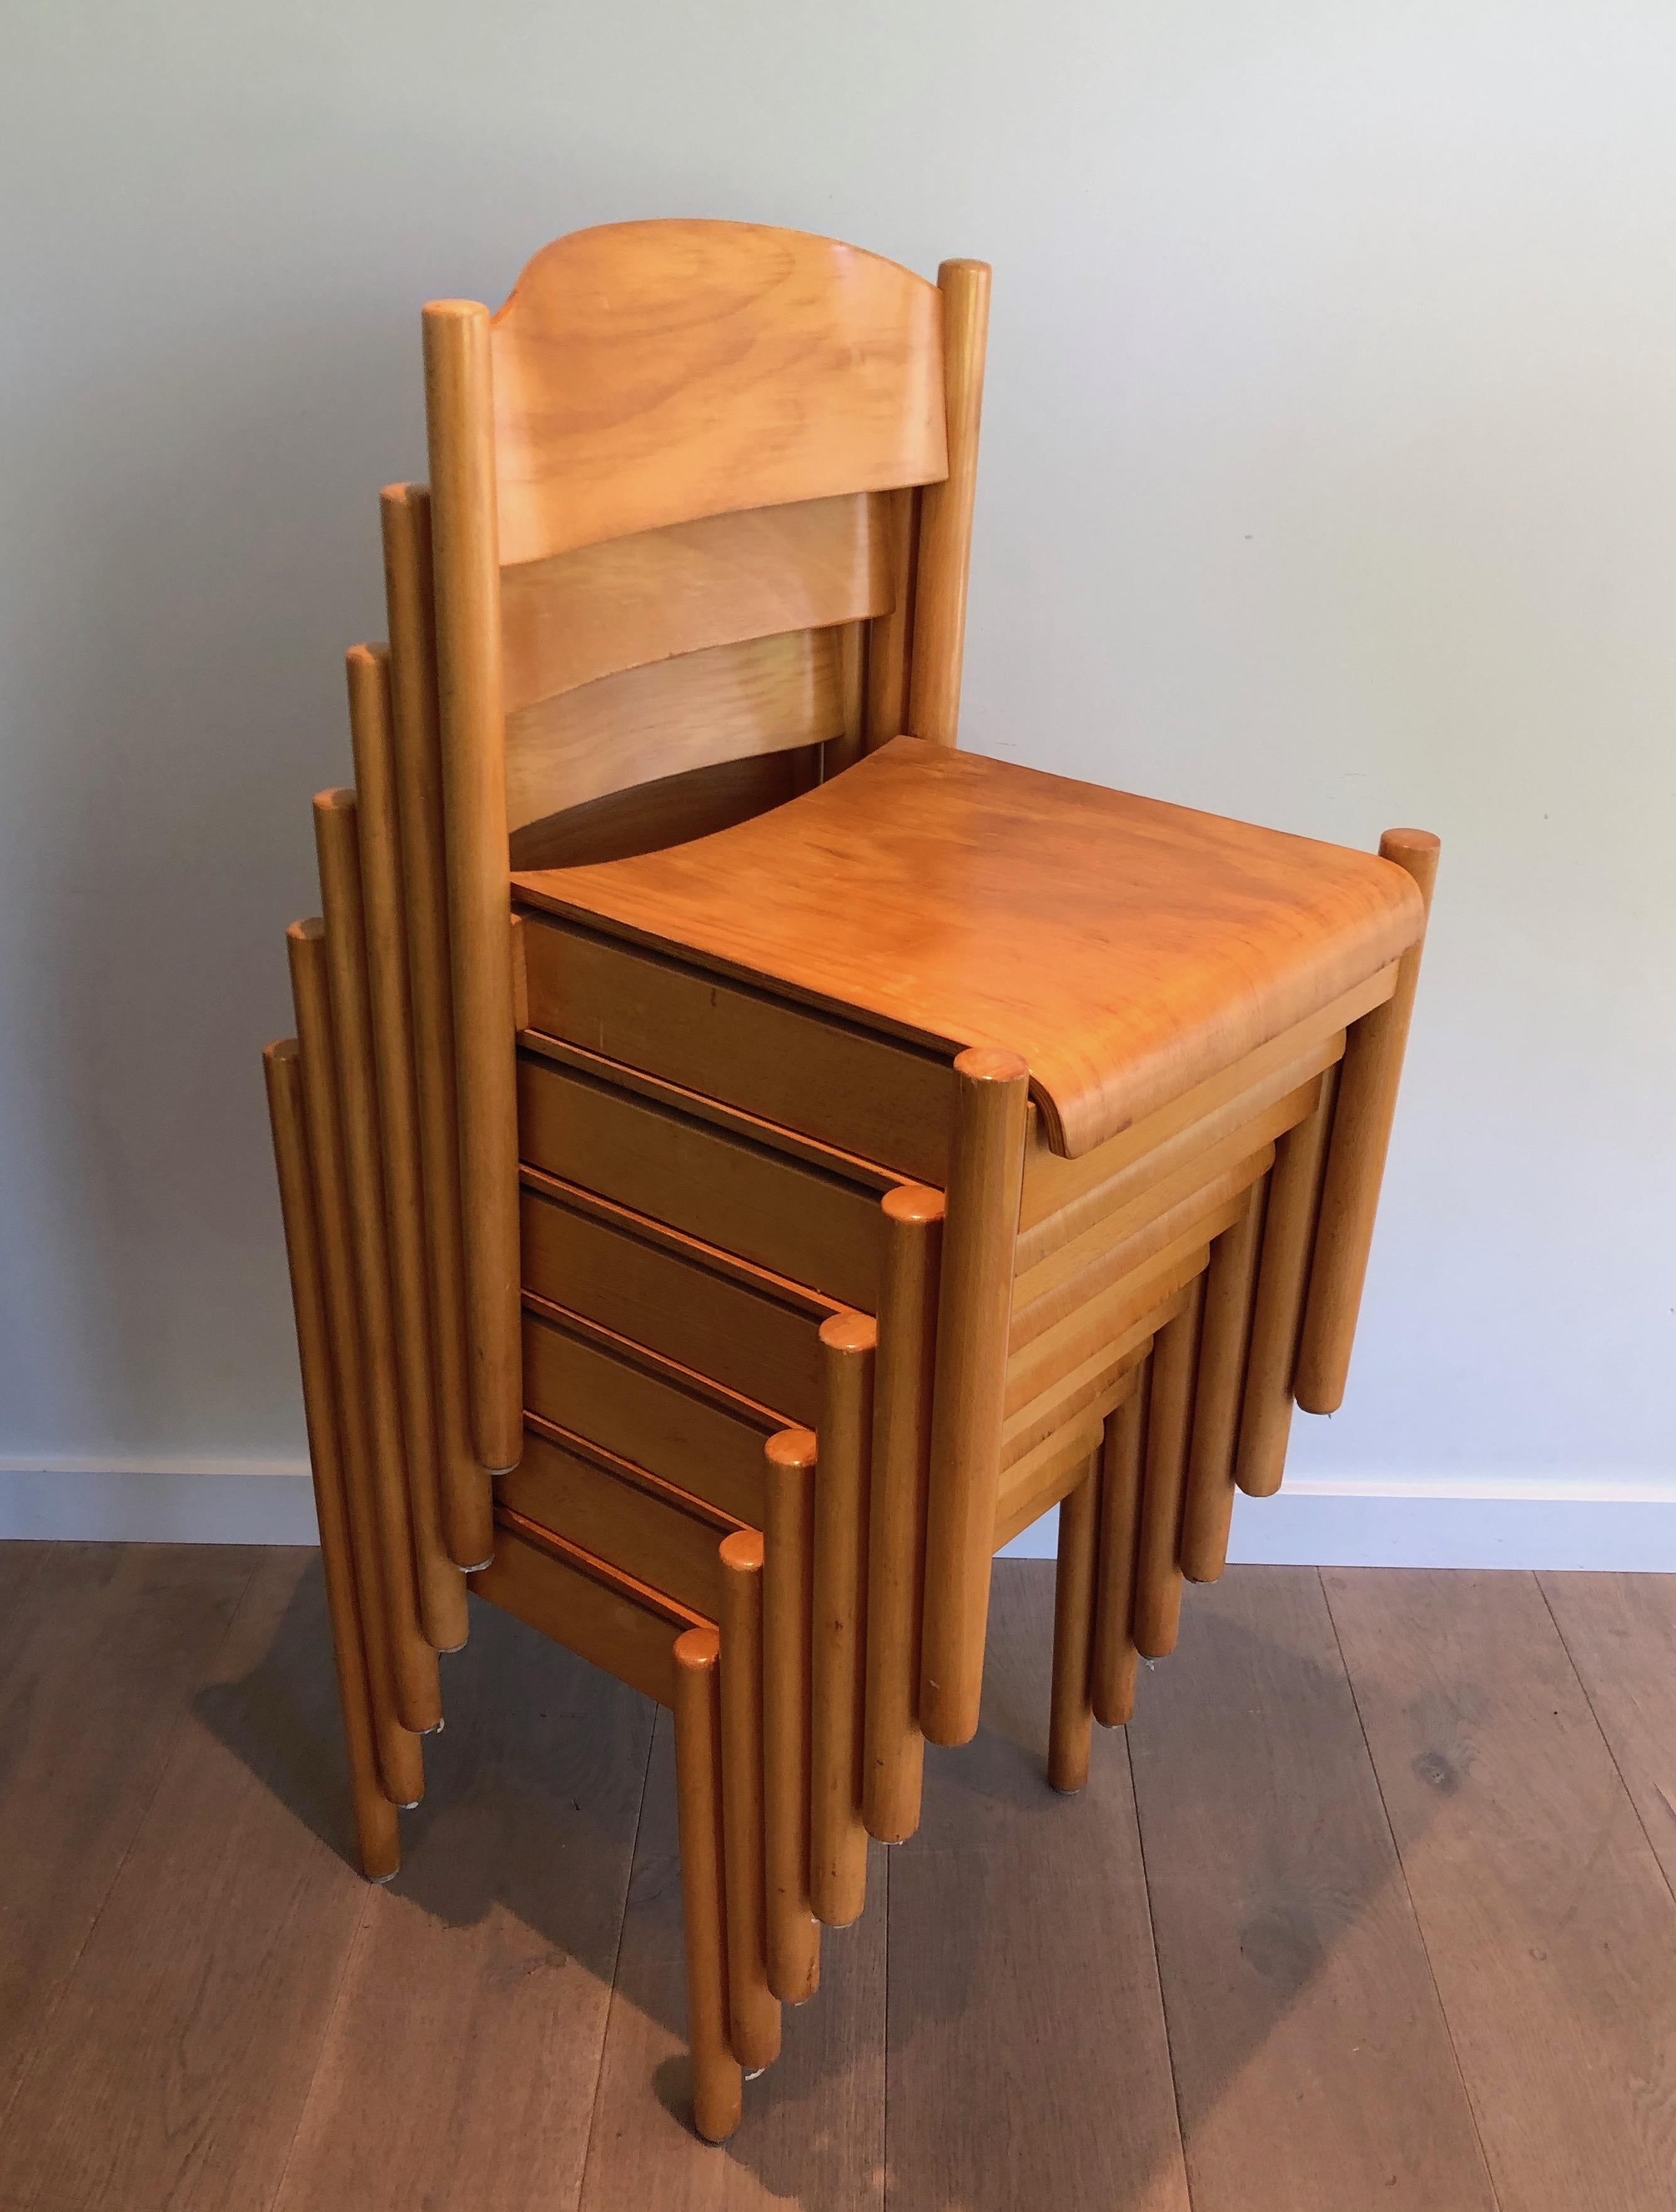 Set of 6 Stackable Pine Chairs, German Work by Karl Klipper, Circa 1970 In Good Condition For Sale In Marcq-en-Barœul, Hauts-de-France